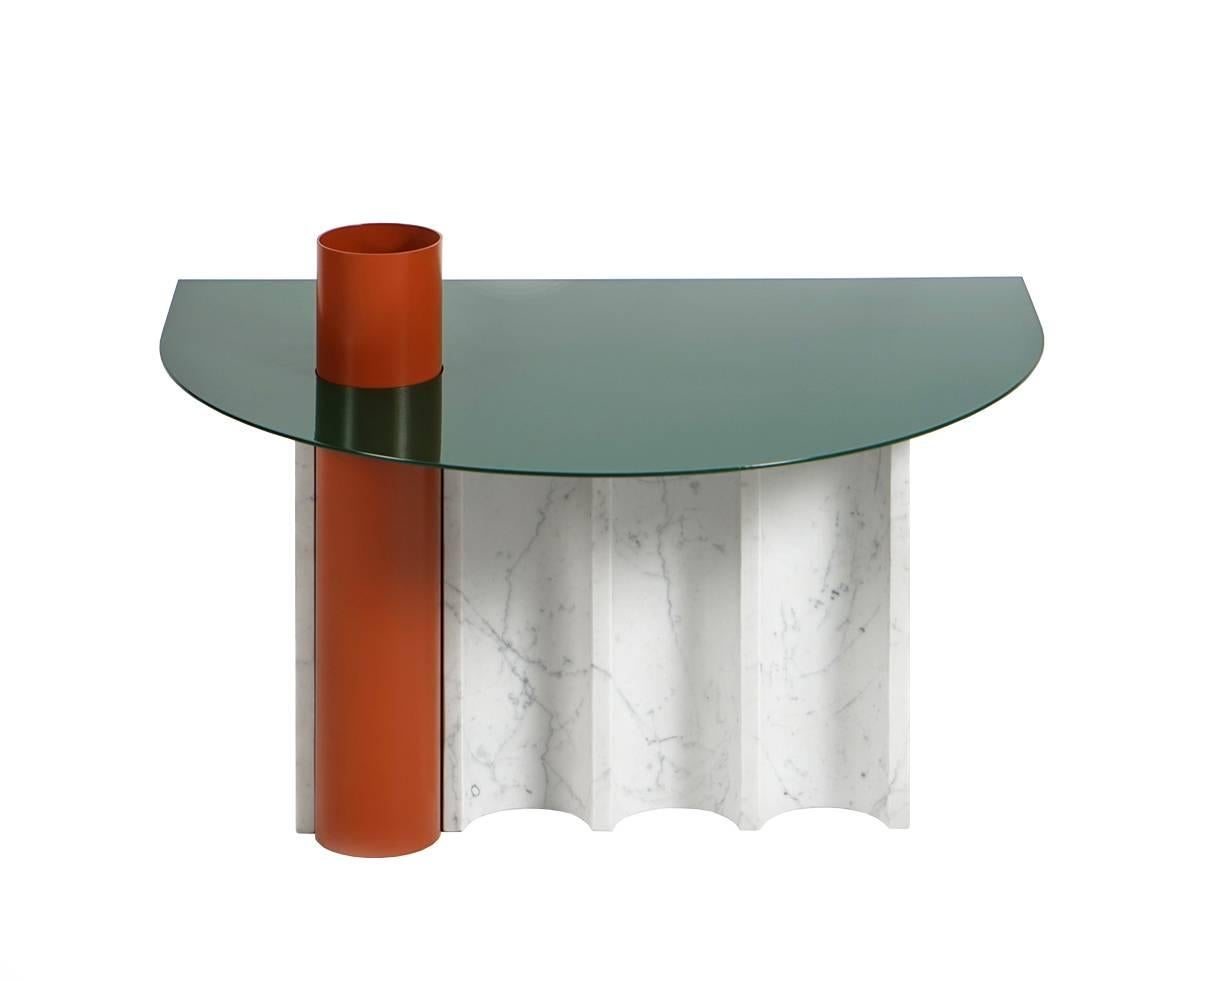 European Modern Coffee Table in Marble and Powder Coated Steel from 